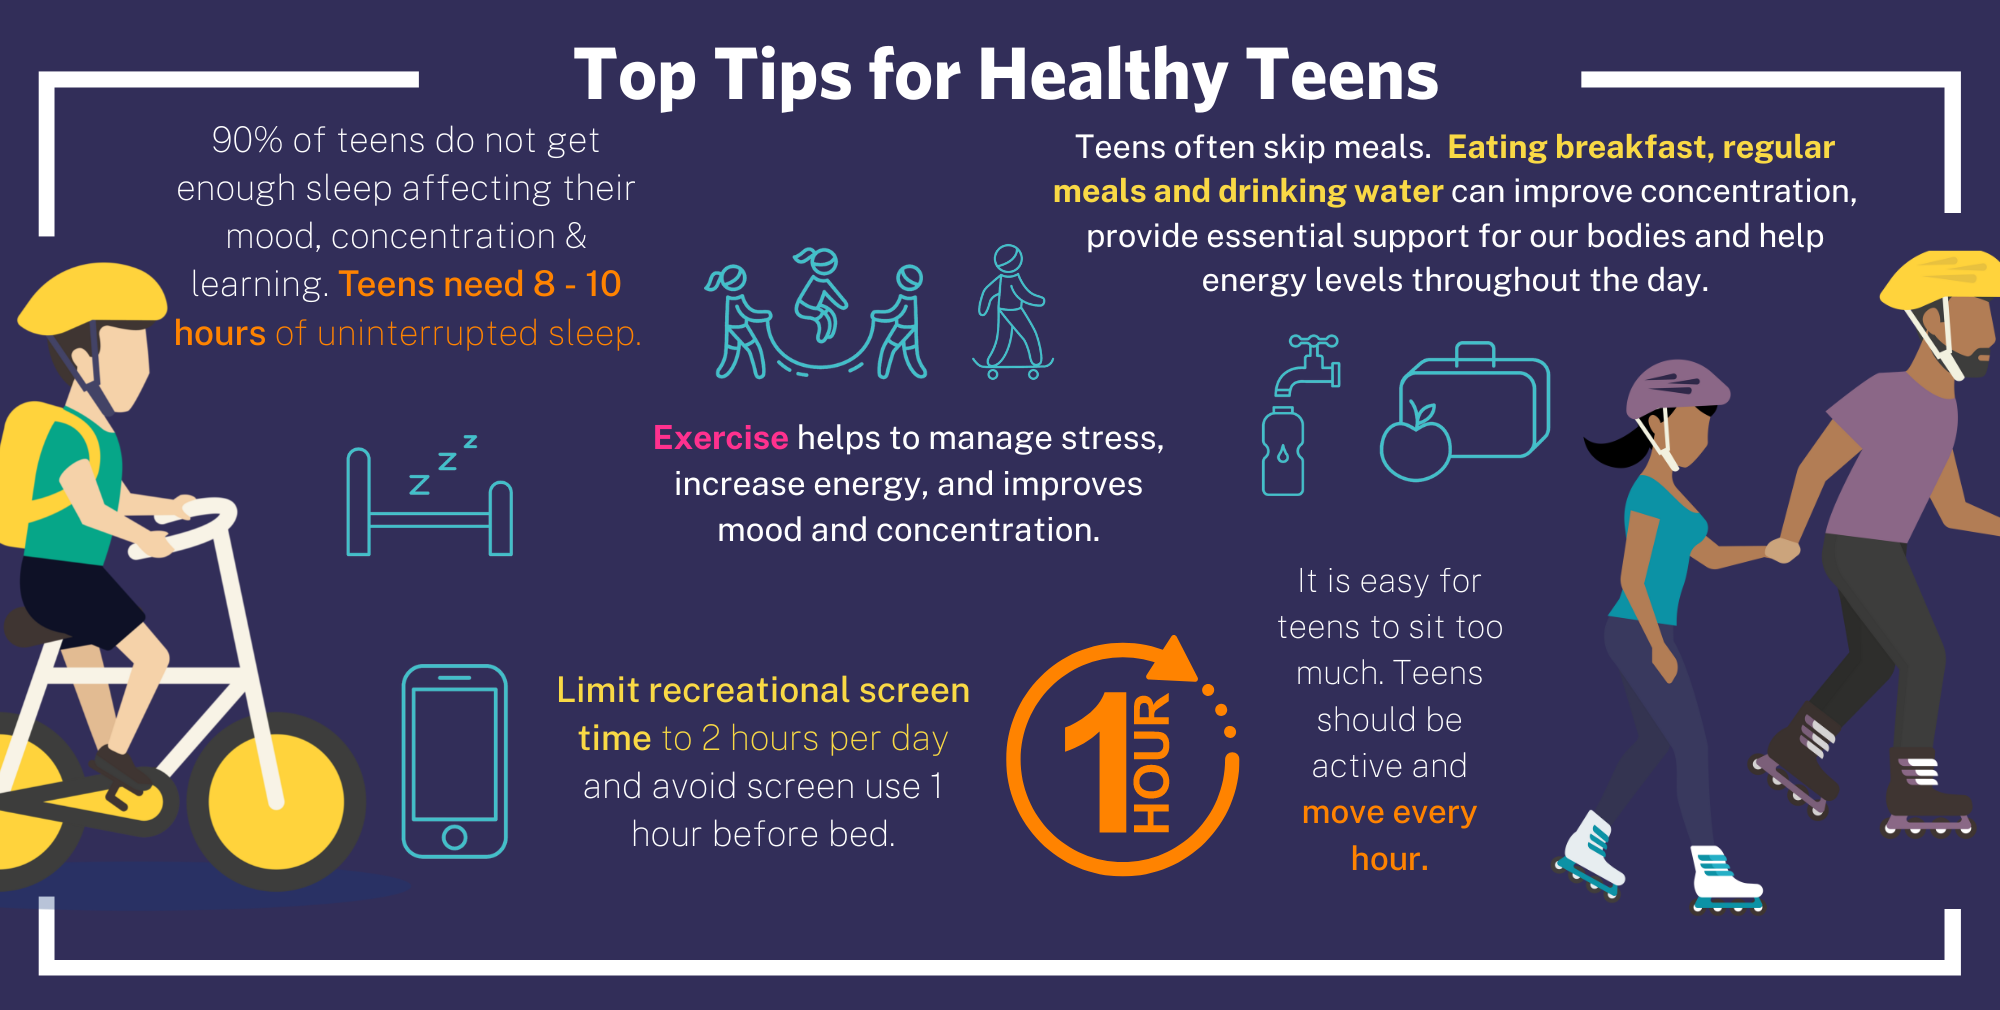 Tips for Healthy Teens